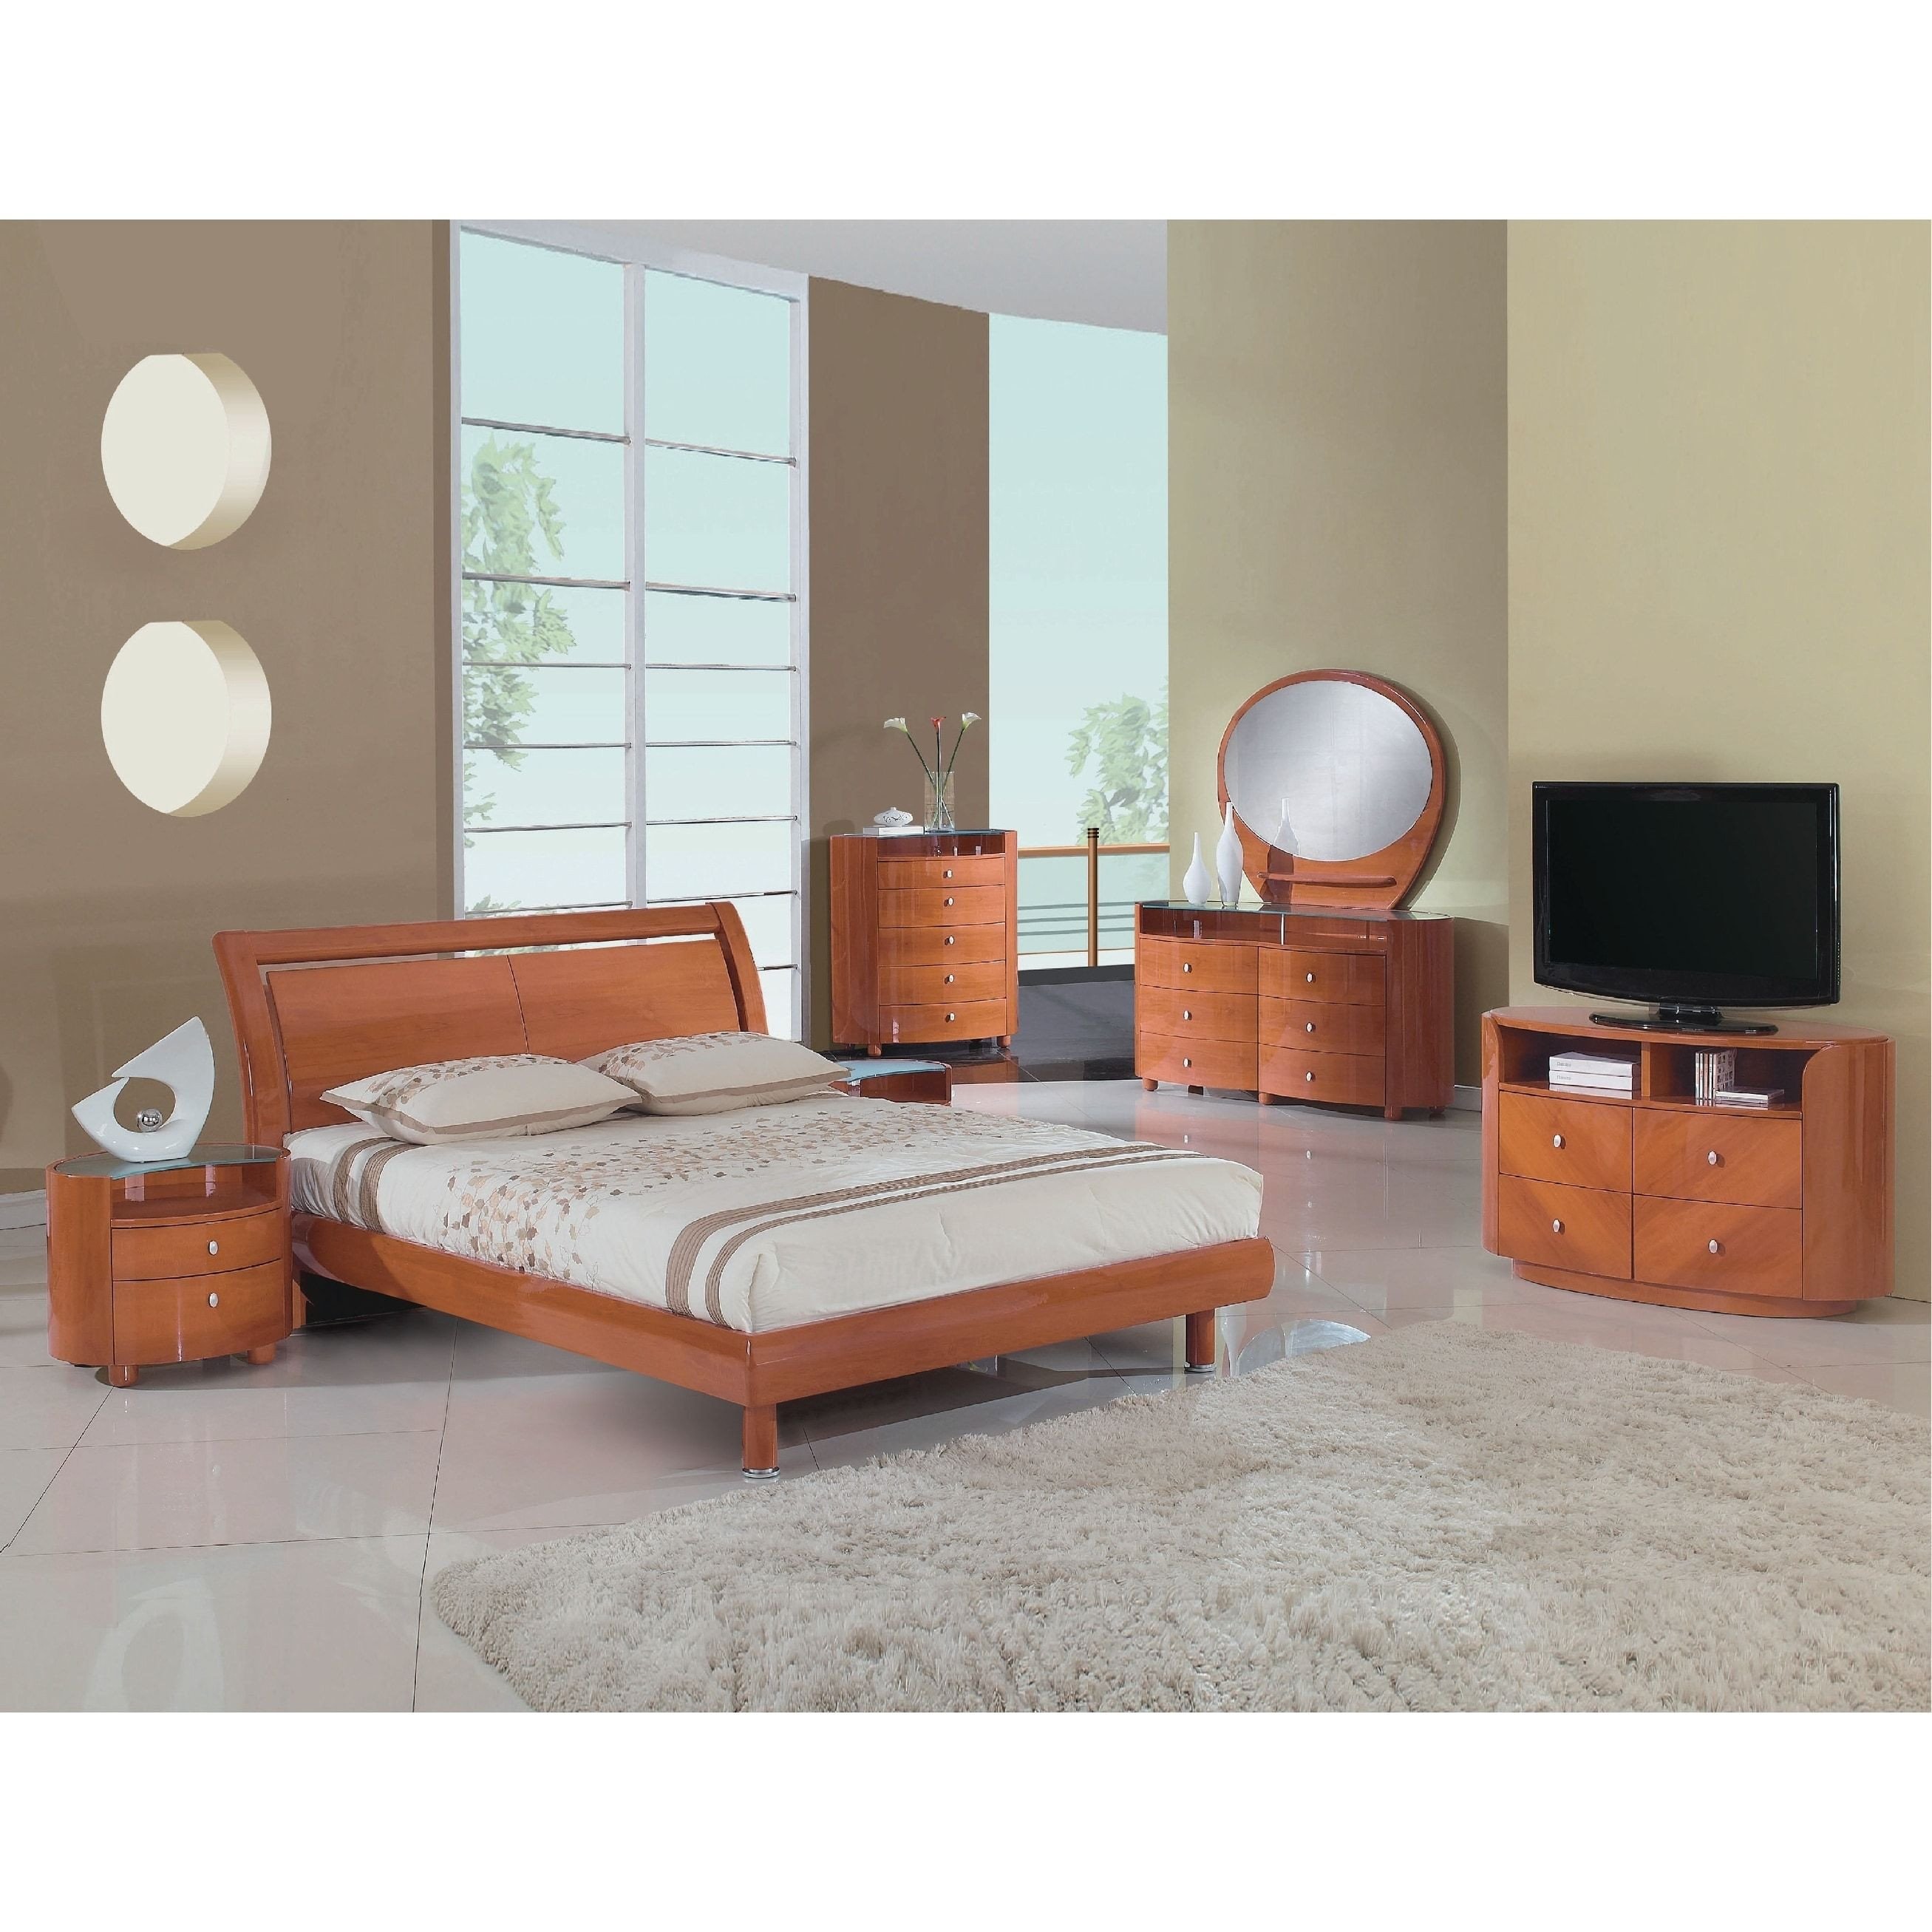 Discount Bedroom Furniture Set Luxury Line Shopping Bedding Furniture Electronics Jewelry